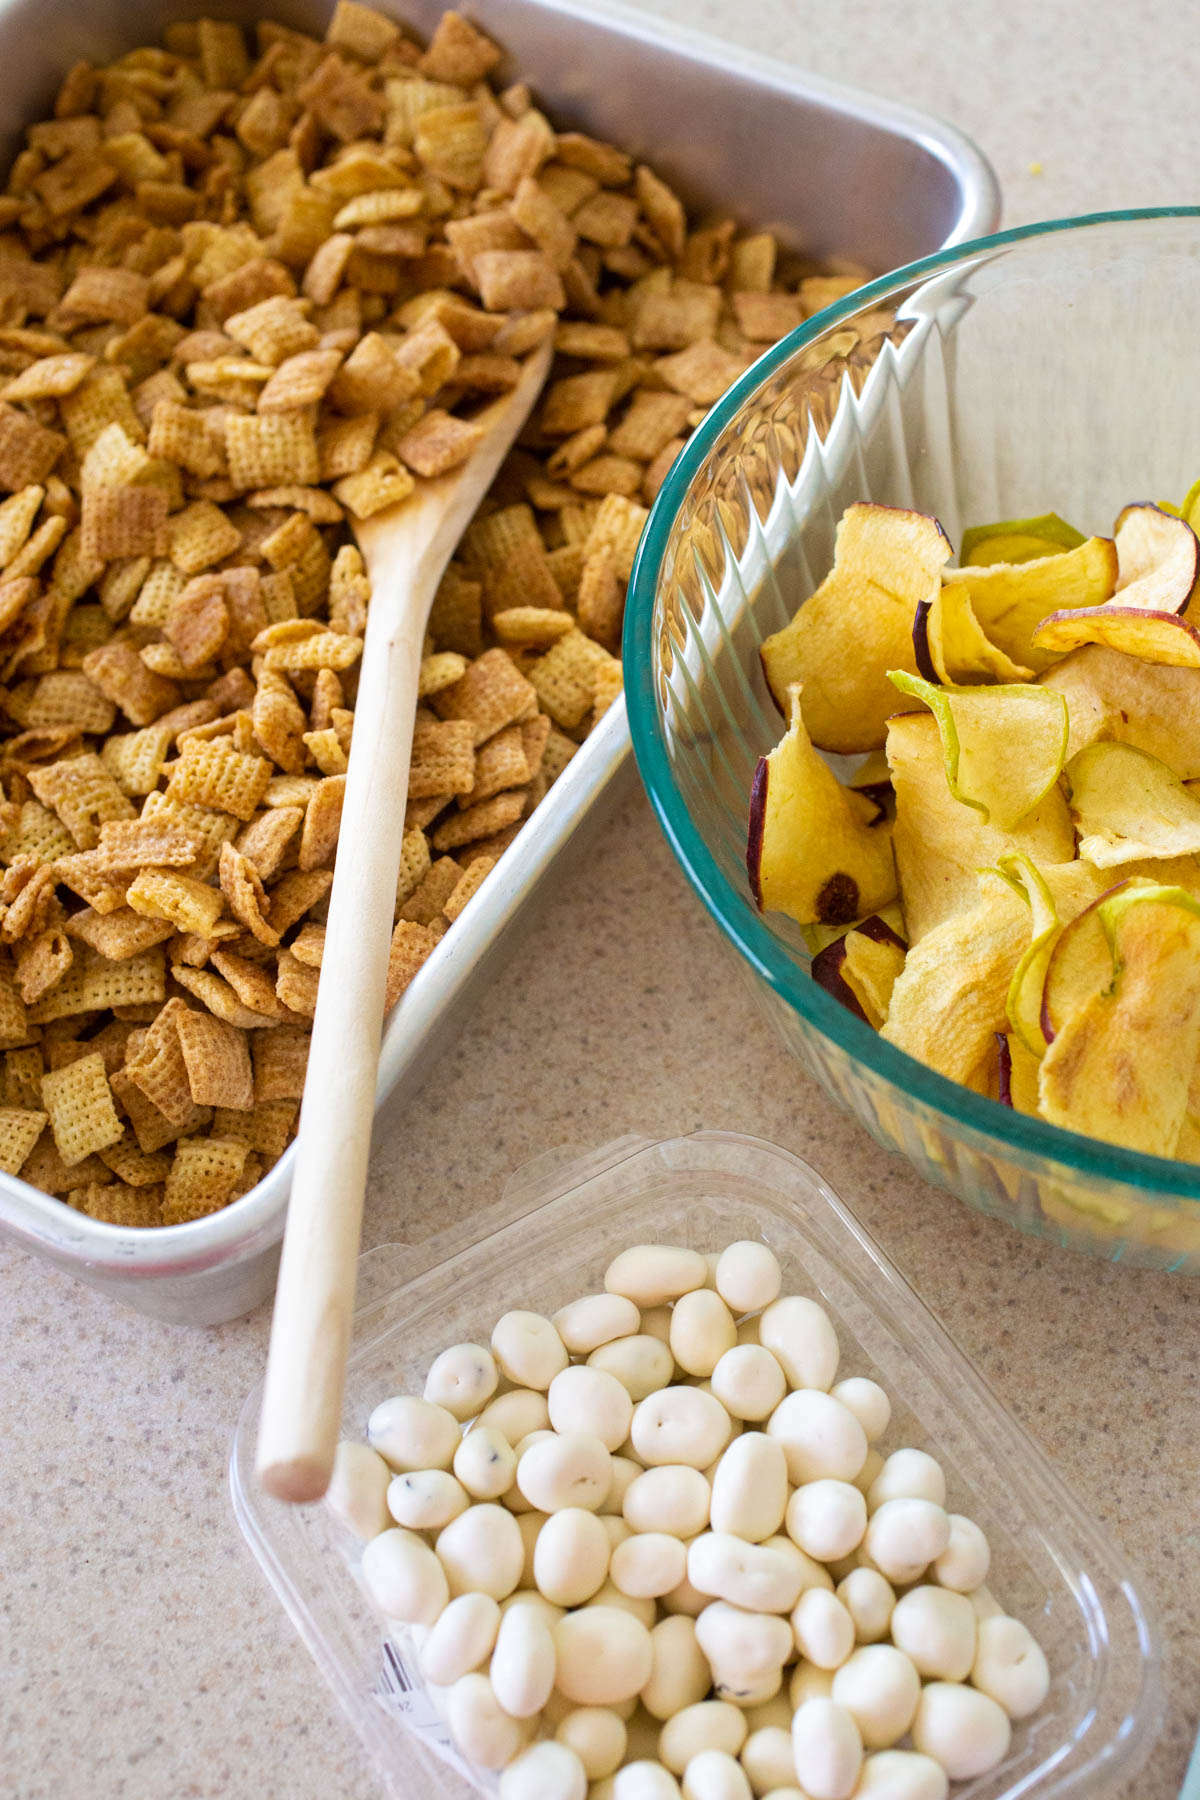 The ingredients are in separate bowls about to be stirred together. The Chex cereal is in a pan, apple chips in a mixing bowl, and yogurt covered raisins in a small package.